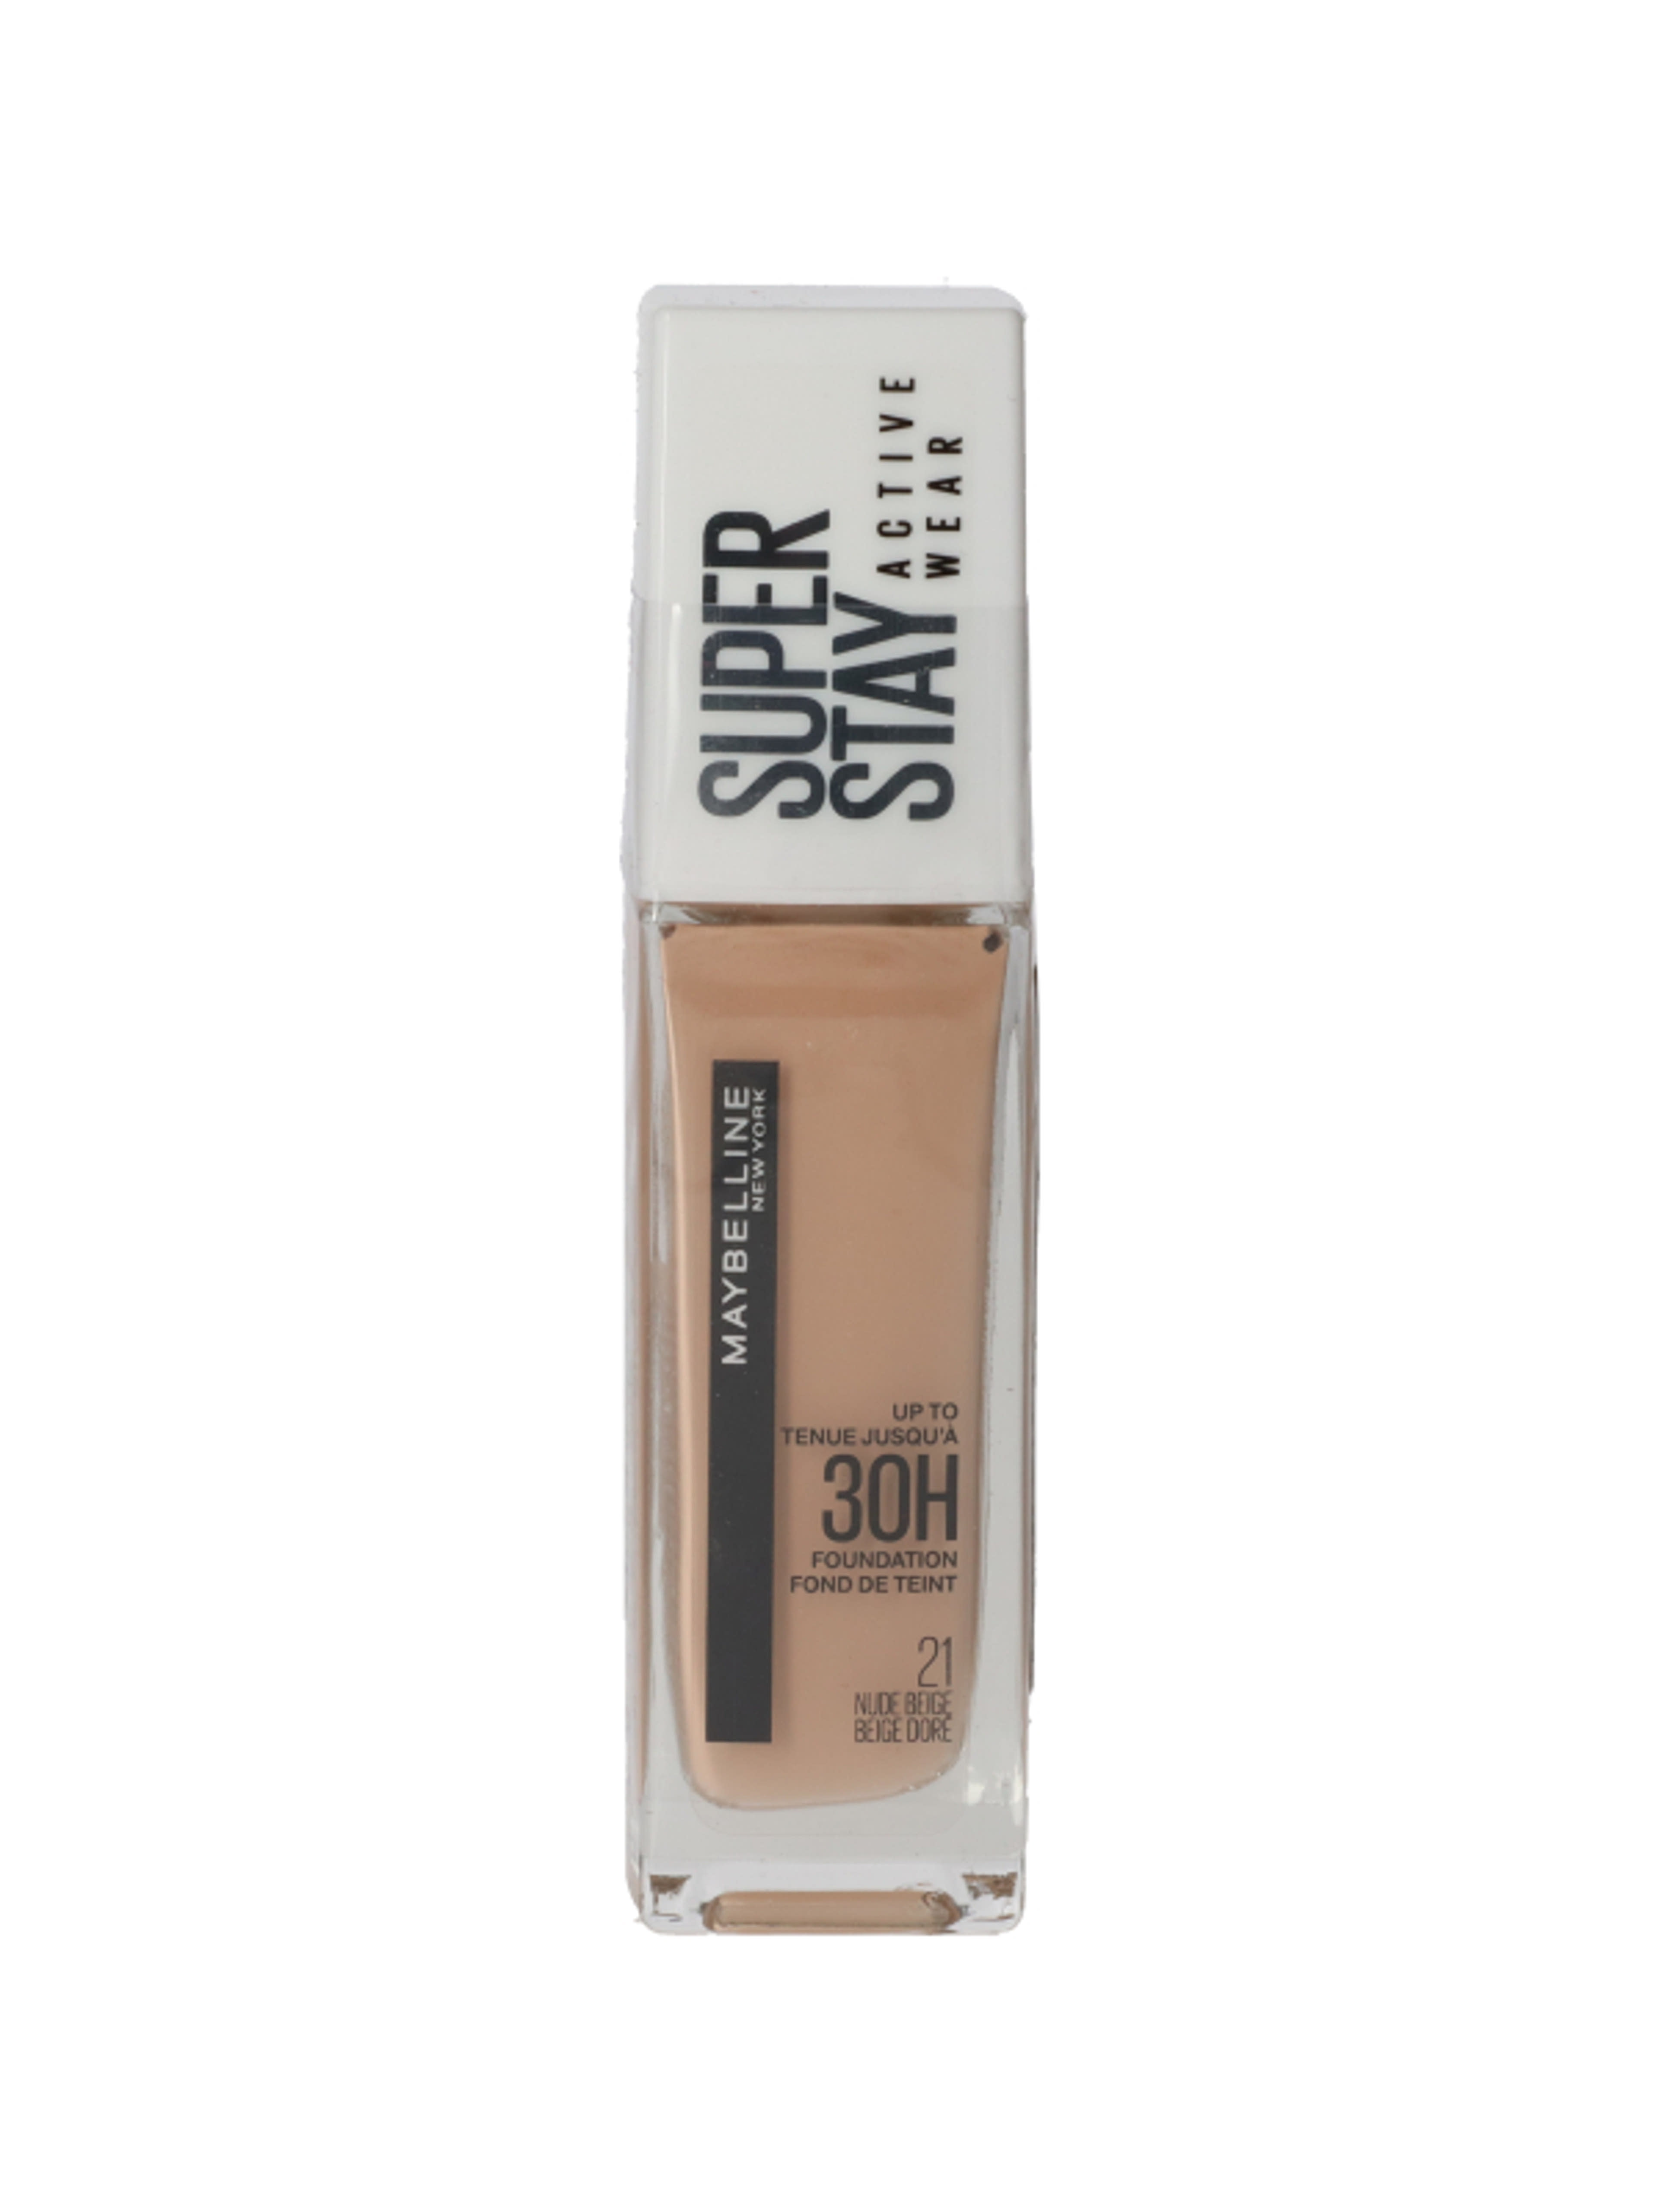 Maybelline SuperStay 30H Alapozó, 21 Nude Beige - 1 db